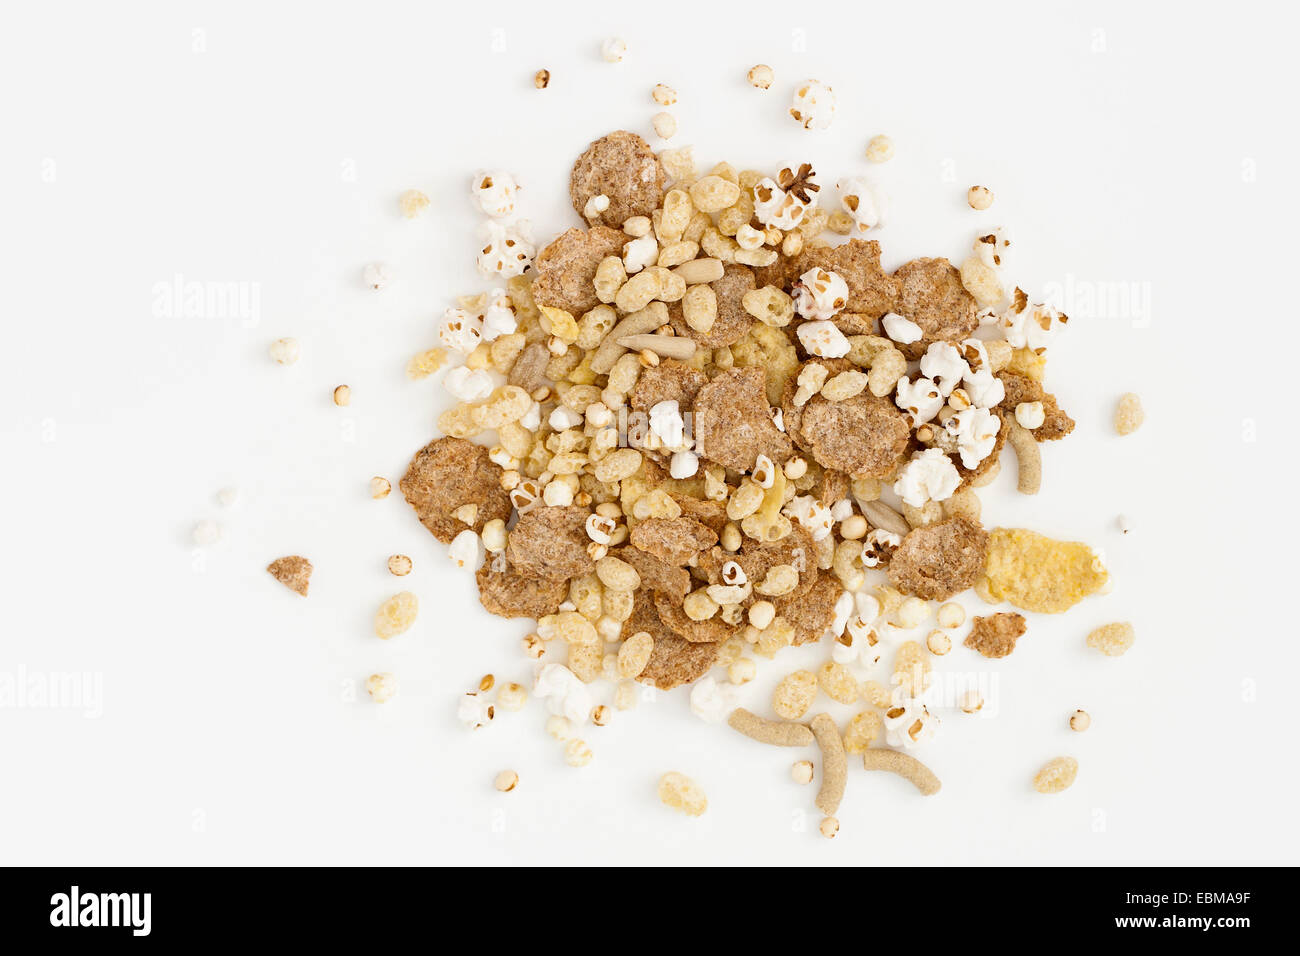 Morning cereal mix from above on white background Stock Photo